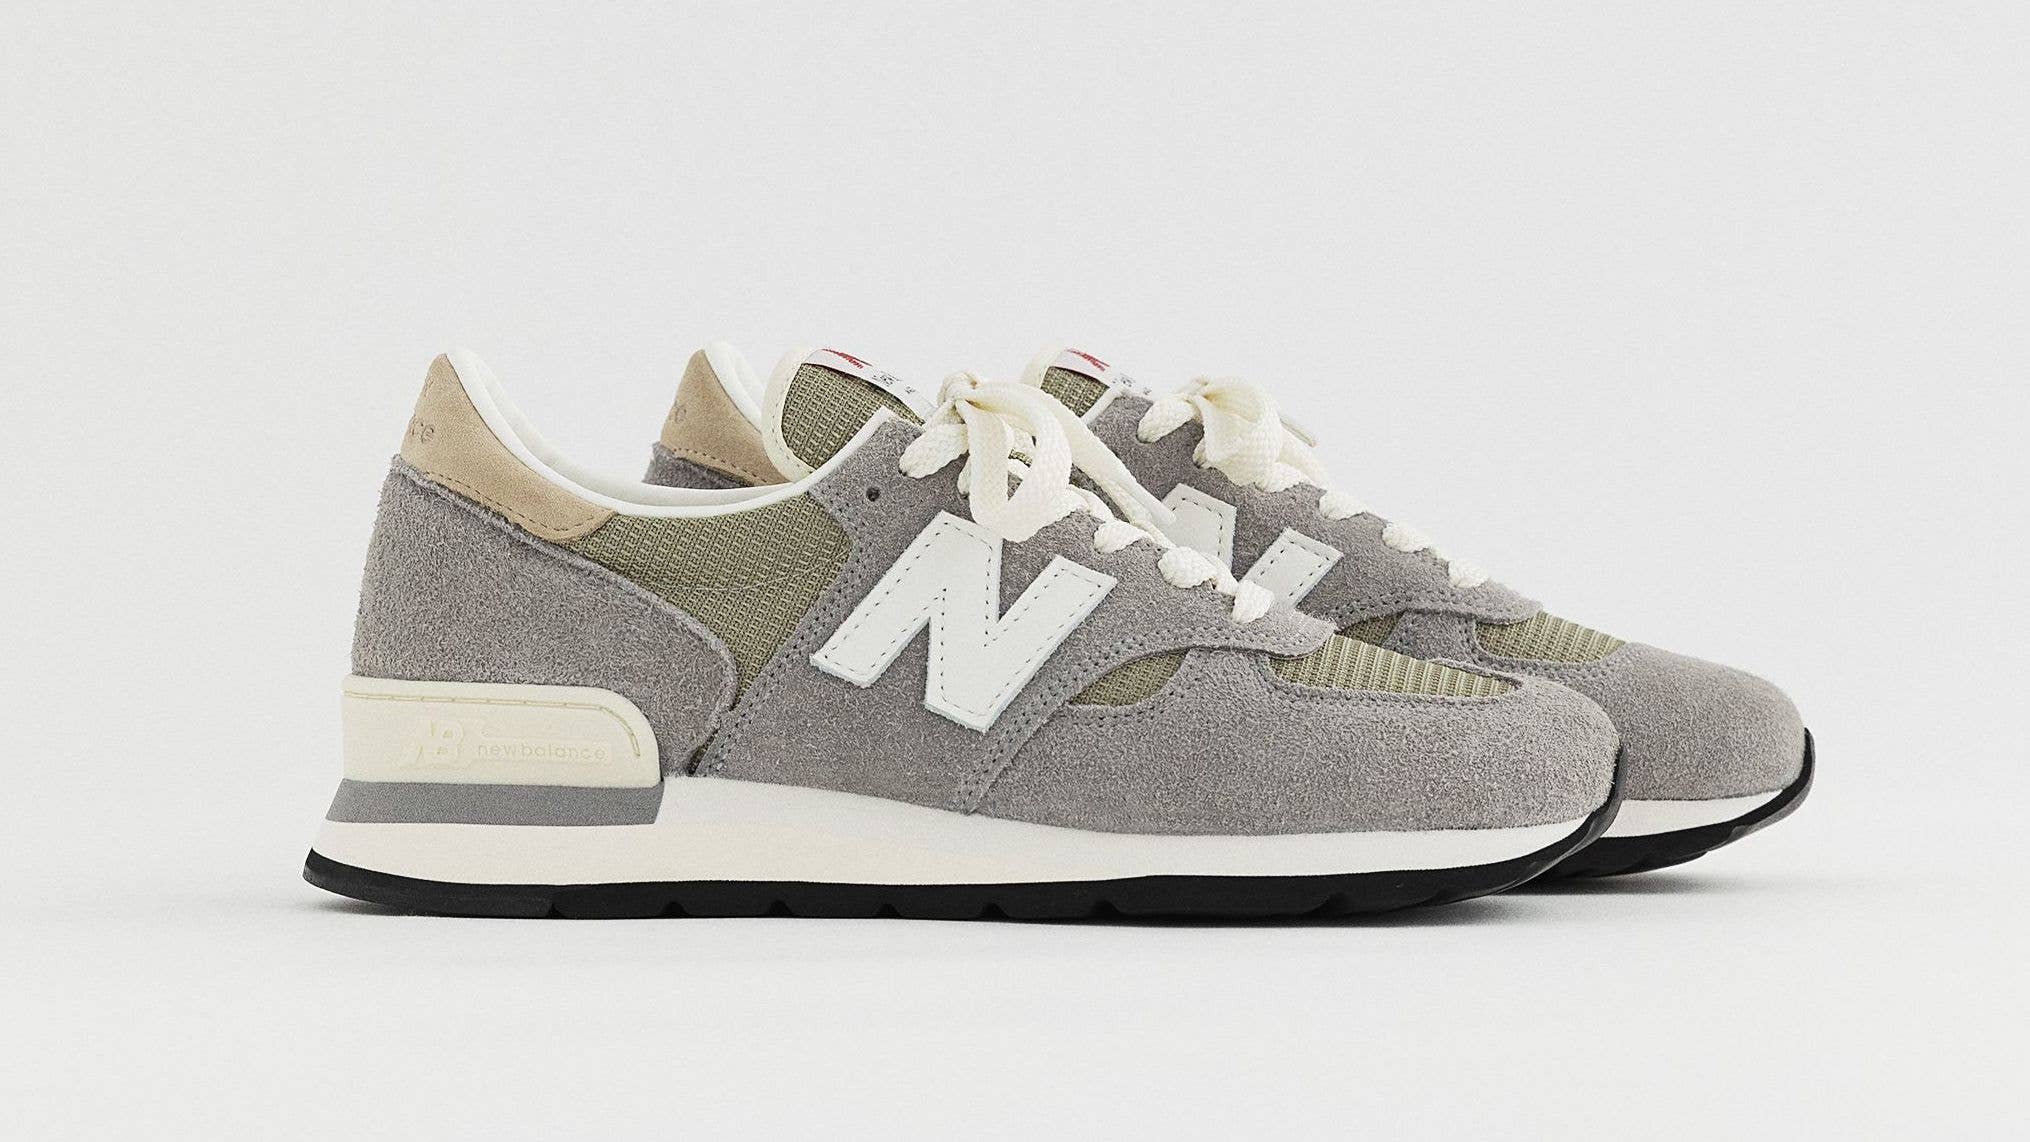 Teddy Santis's collection for New Balance is identical to Aimè